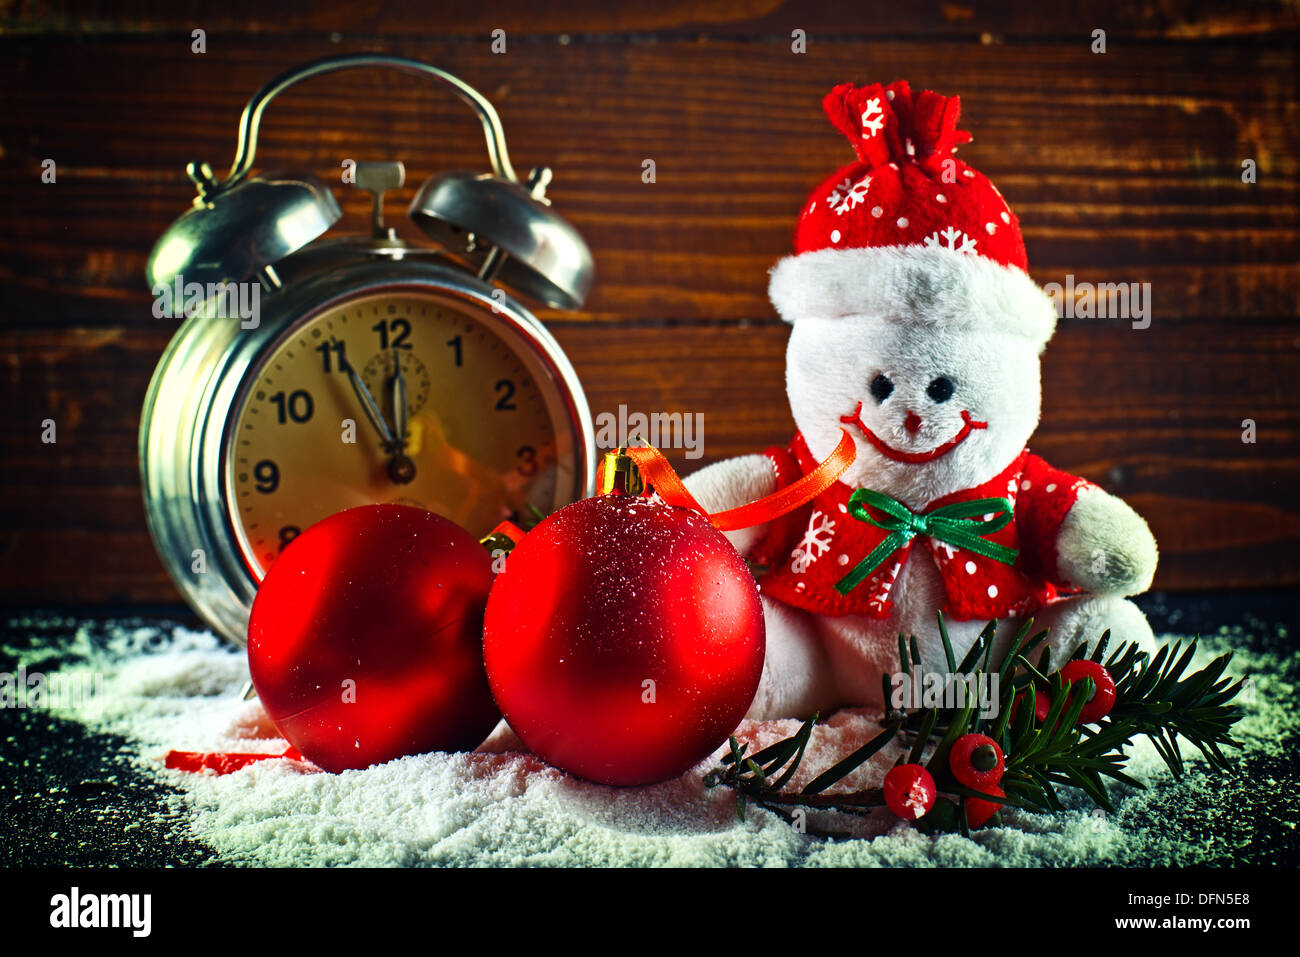 Christmas balls and wool snowman as New Years Eve decor. Stock Photo